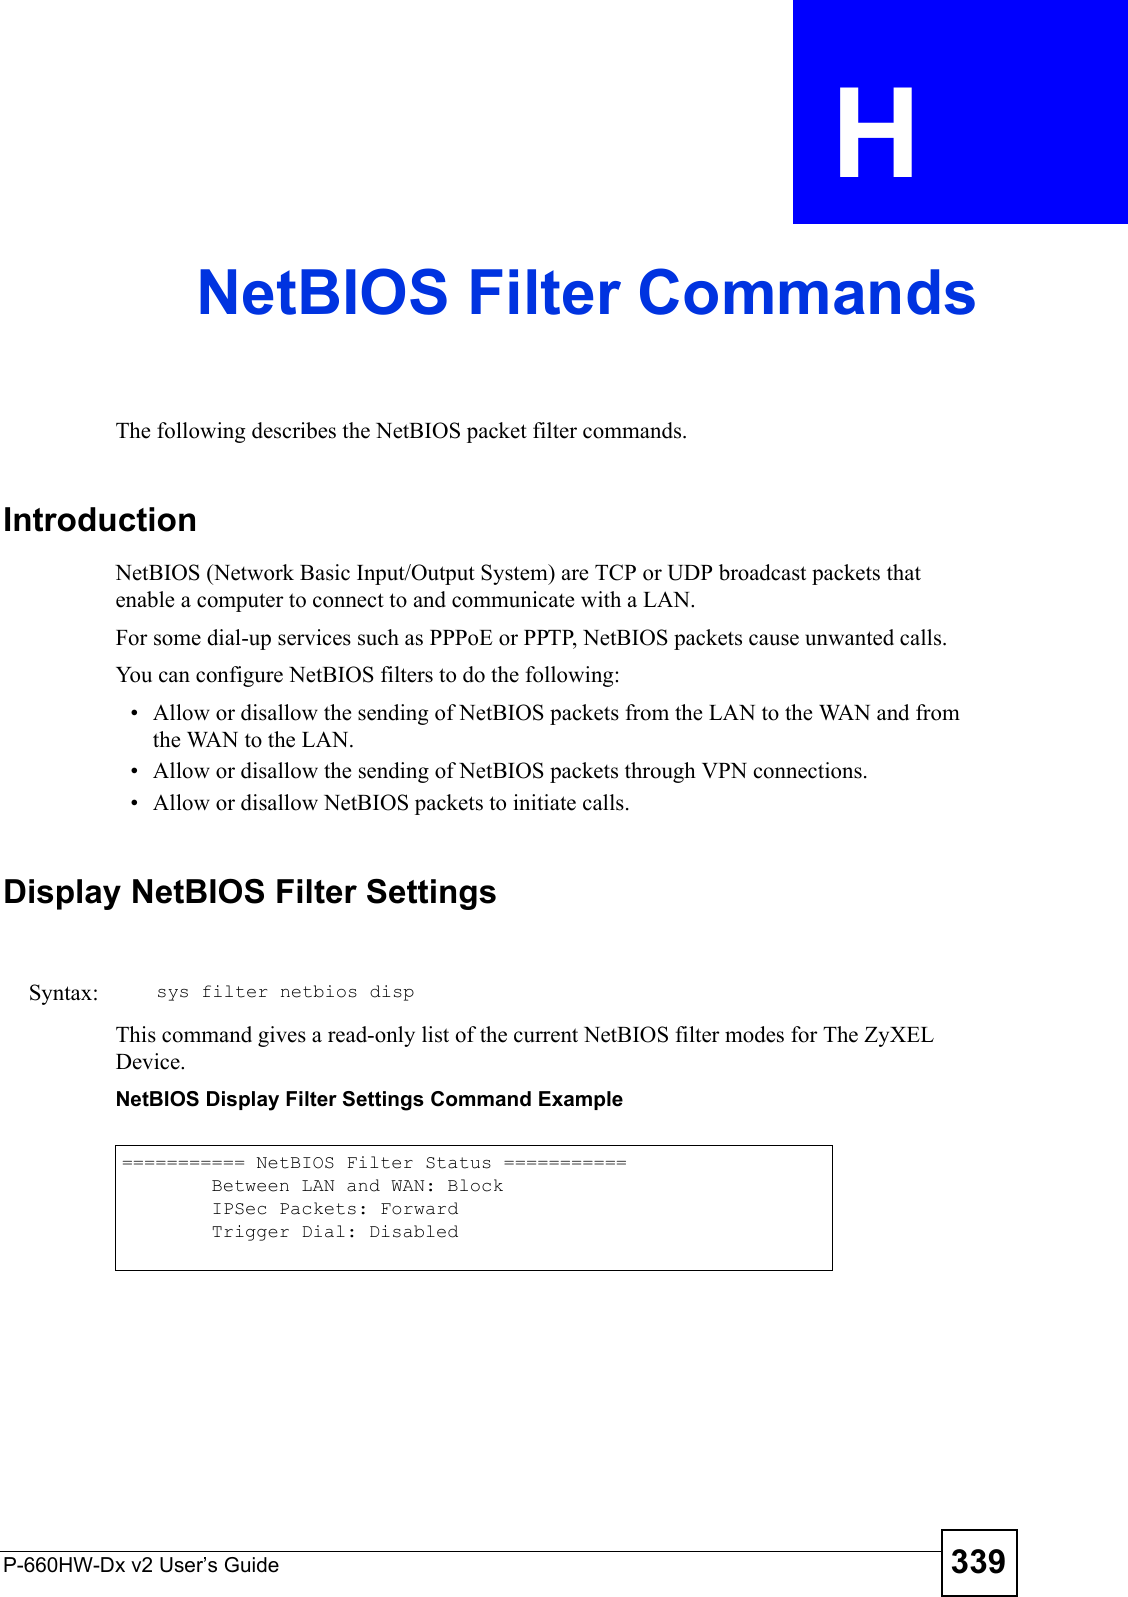 P-660HW-Dx v2 User’s Guide 339APPENDIX  H NetBIOS Filter CommandsThe following describes the NetBIOS packet filter commands.IntroductionNetBIOS (Network Basic Input/Output System) are TCP or UDP broadcast packets that enable a computer to connect to and communicate with a LAN. For some dial-up services such as PPPoE or PPTP, NetBIOS packets cause unwanted calls.You can configure NetBIOS filters to do the following:• Allow or disallow the sending of NetBIOS packets from the LAN to the WAN and from the WAN to the LAN.• Allow or disallow the sending of NetBIOS packets through VPN connections.• Allow or disallow NetBIOS packets to initiate calls.Display NetBIOS Filter SettingsThis command gives a read-only list of the current NetBIOS filter modes for The ZyXEL Device.NetBIOS Display Filter Settings Command ExampleSyntax: sys filter netbios disp=========== NetBIOS Filter Status ===========        Between LAN and WAN: Block        IPSec Packets: Forward        Trigger Dial: Disabled